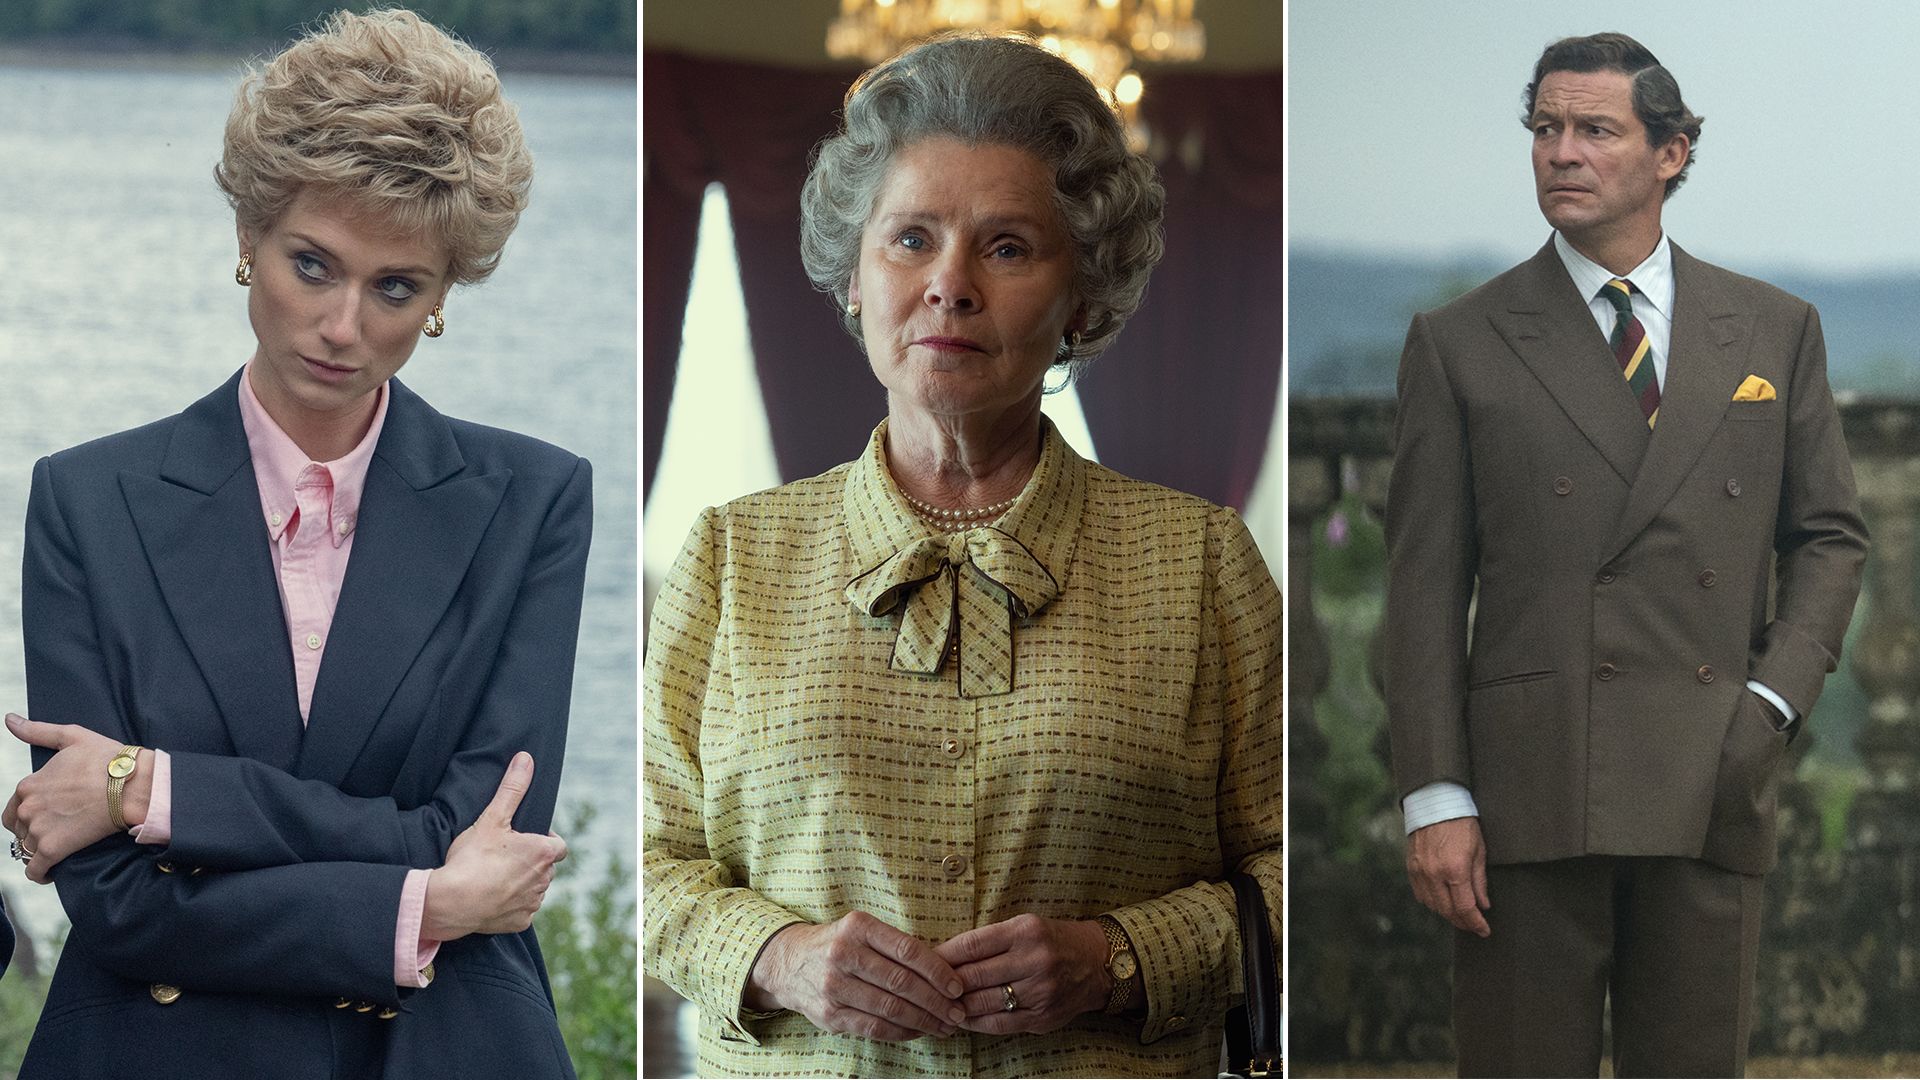 Princess Diana, The Queen and Prince Charles portrayed in The Crown